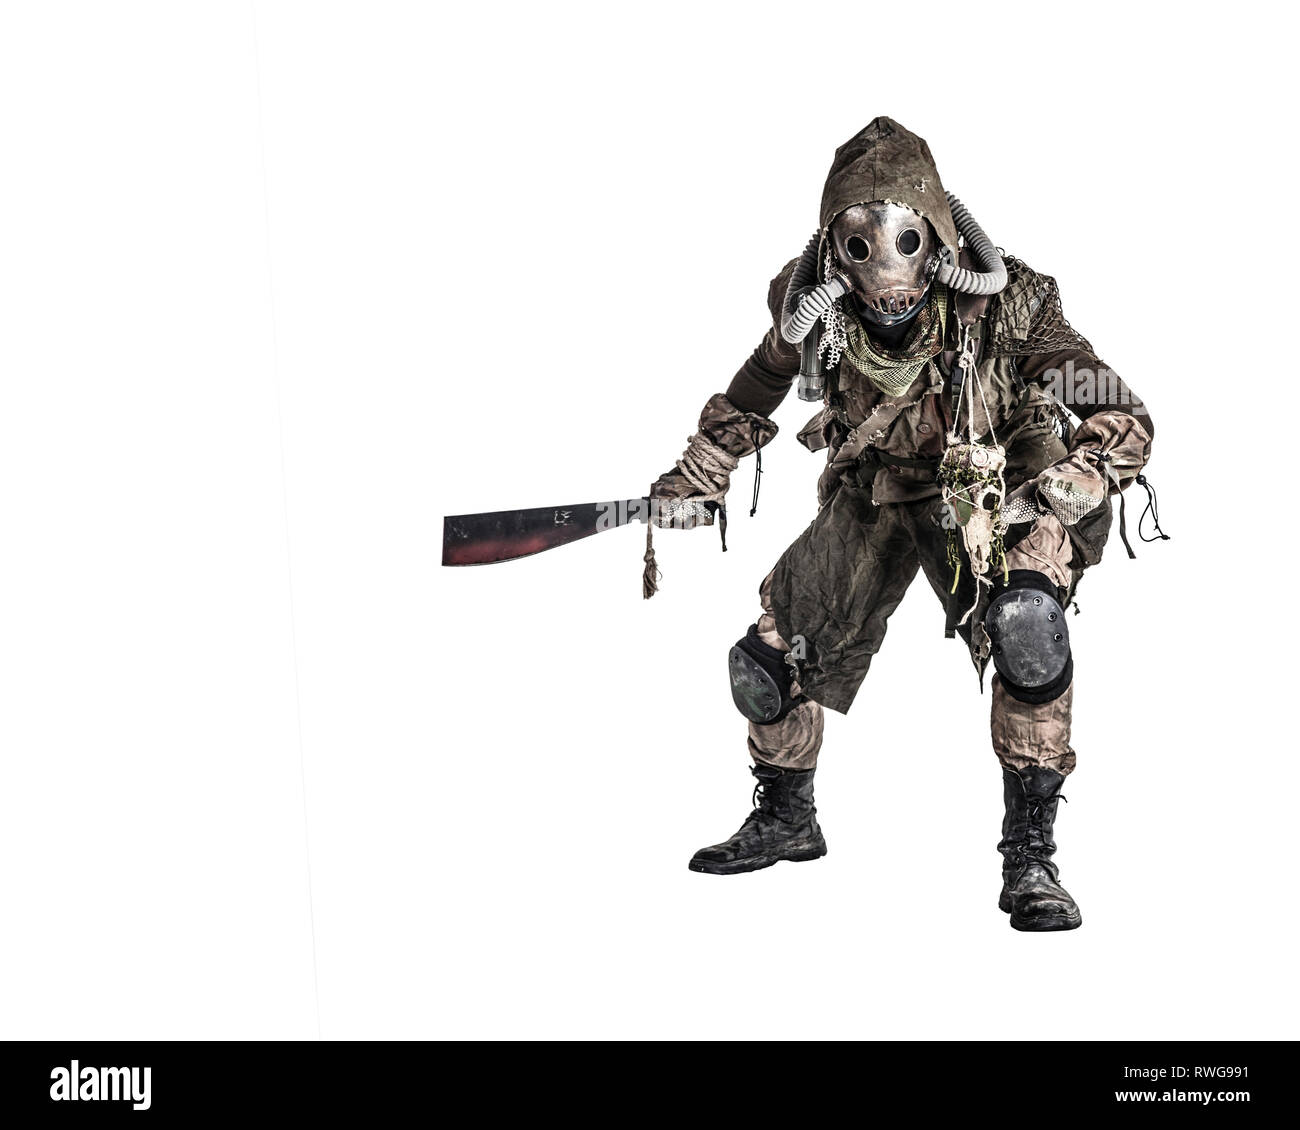 Evil creature wearing tattered rags and gas mask, holding a blood-stained machete. Stock Photo